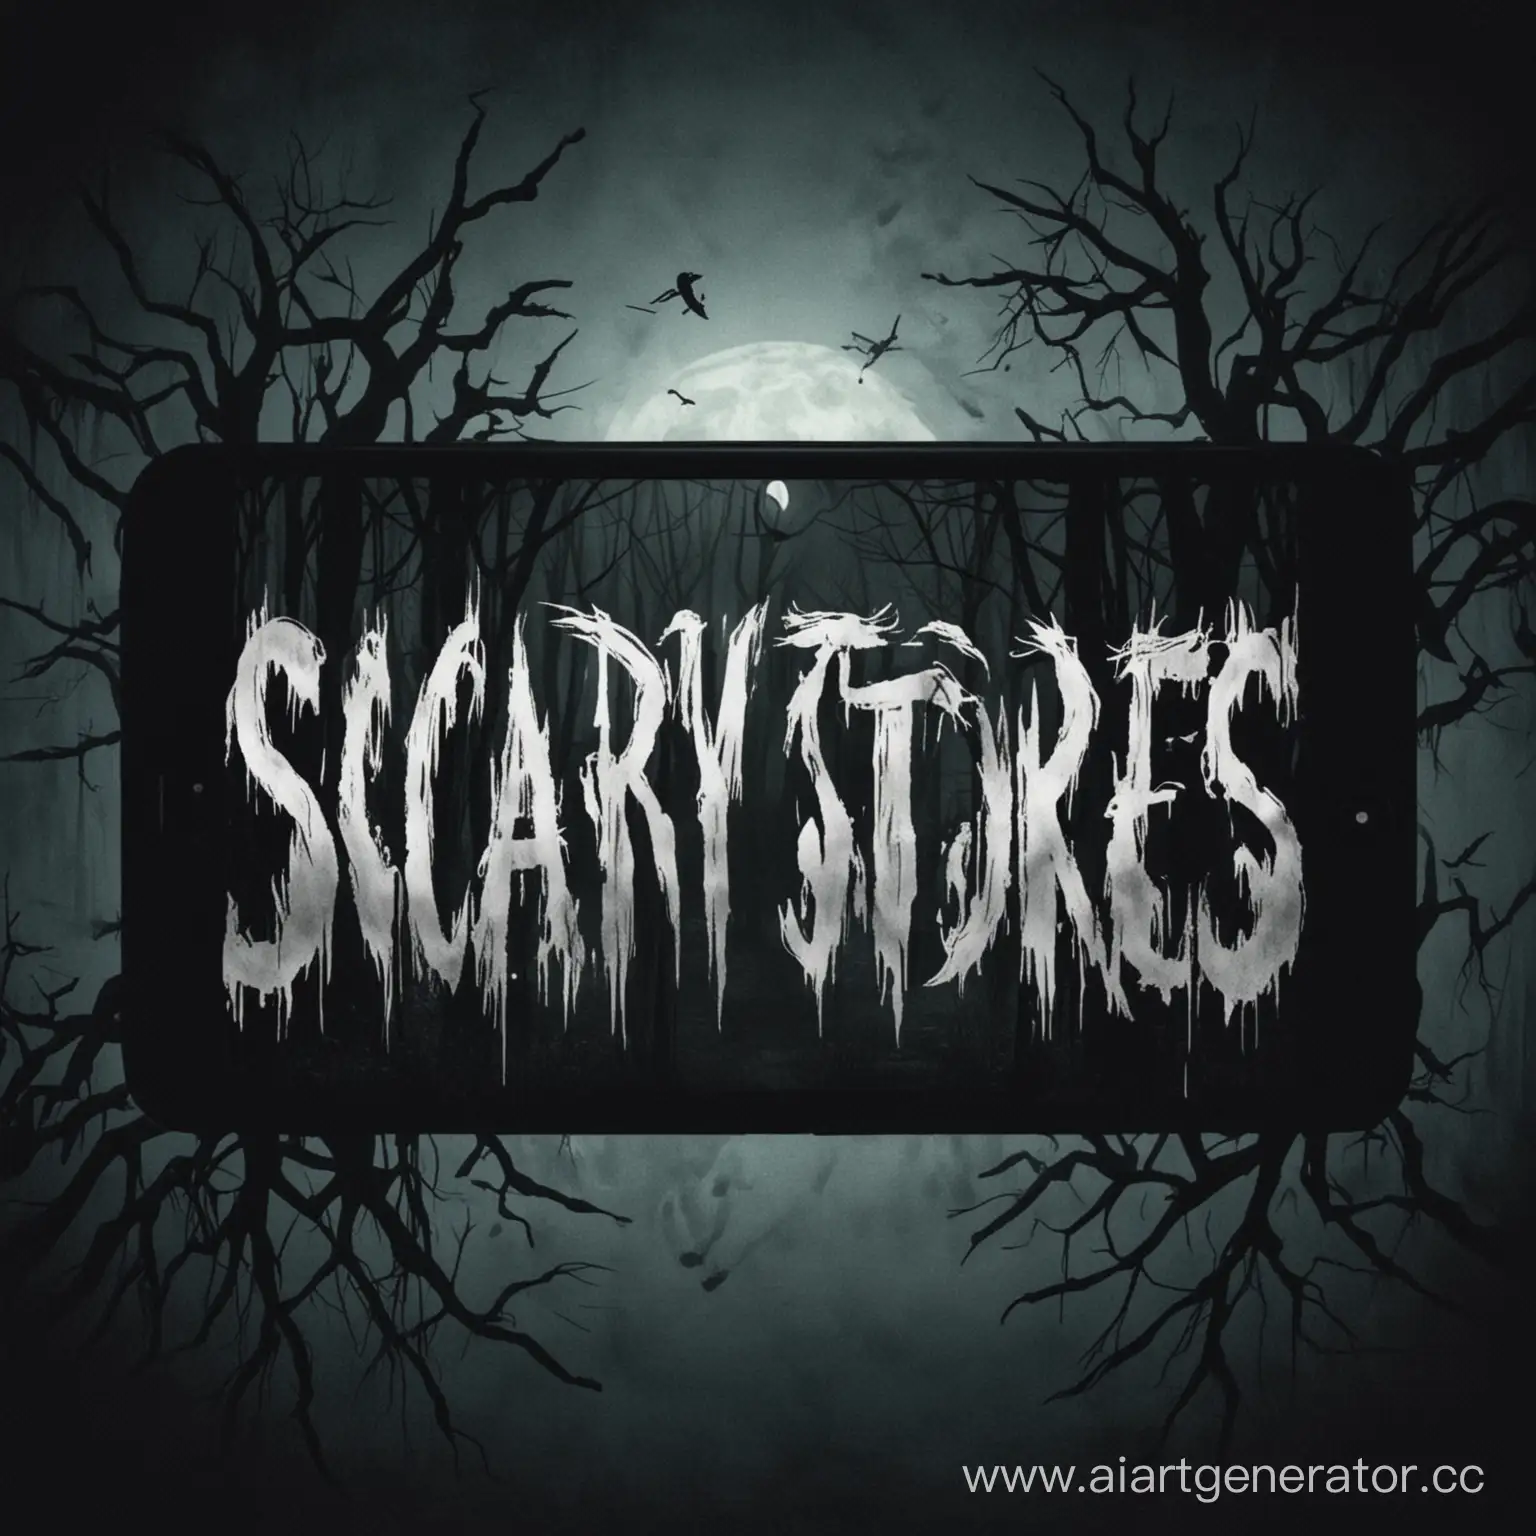 Spooky-Storytelling-YouTube-Channel-Logo-with-a-Theme-of-Scary-Tales